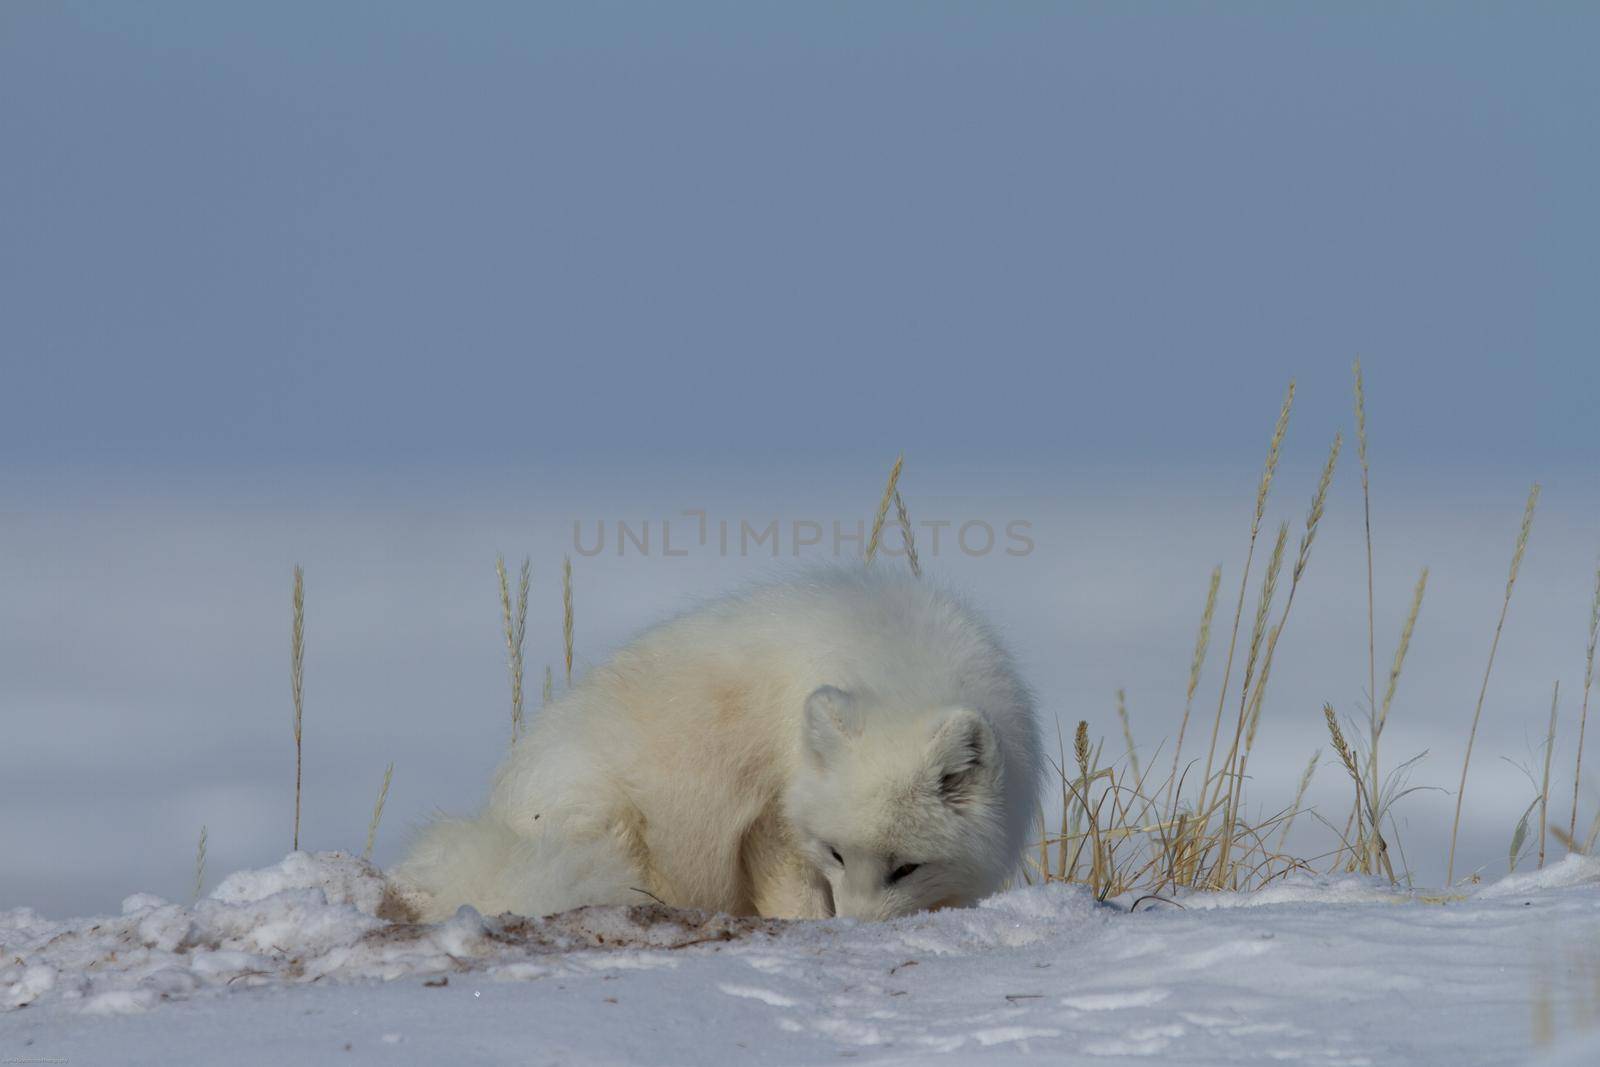 Arctic fox, Vulpes Lagopus, sniffing around the snow in Canada's arctic tundra by Granchinho